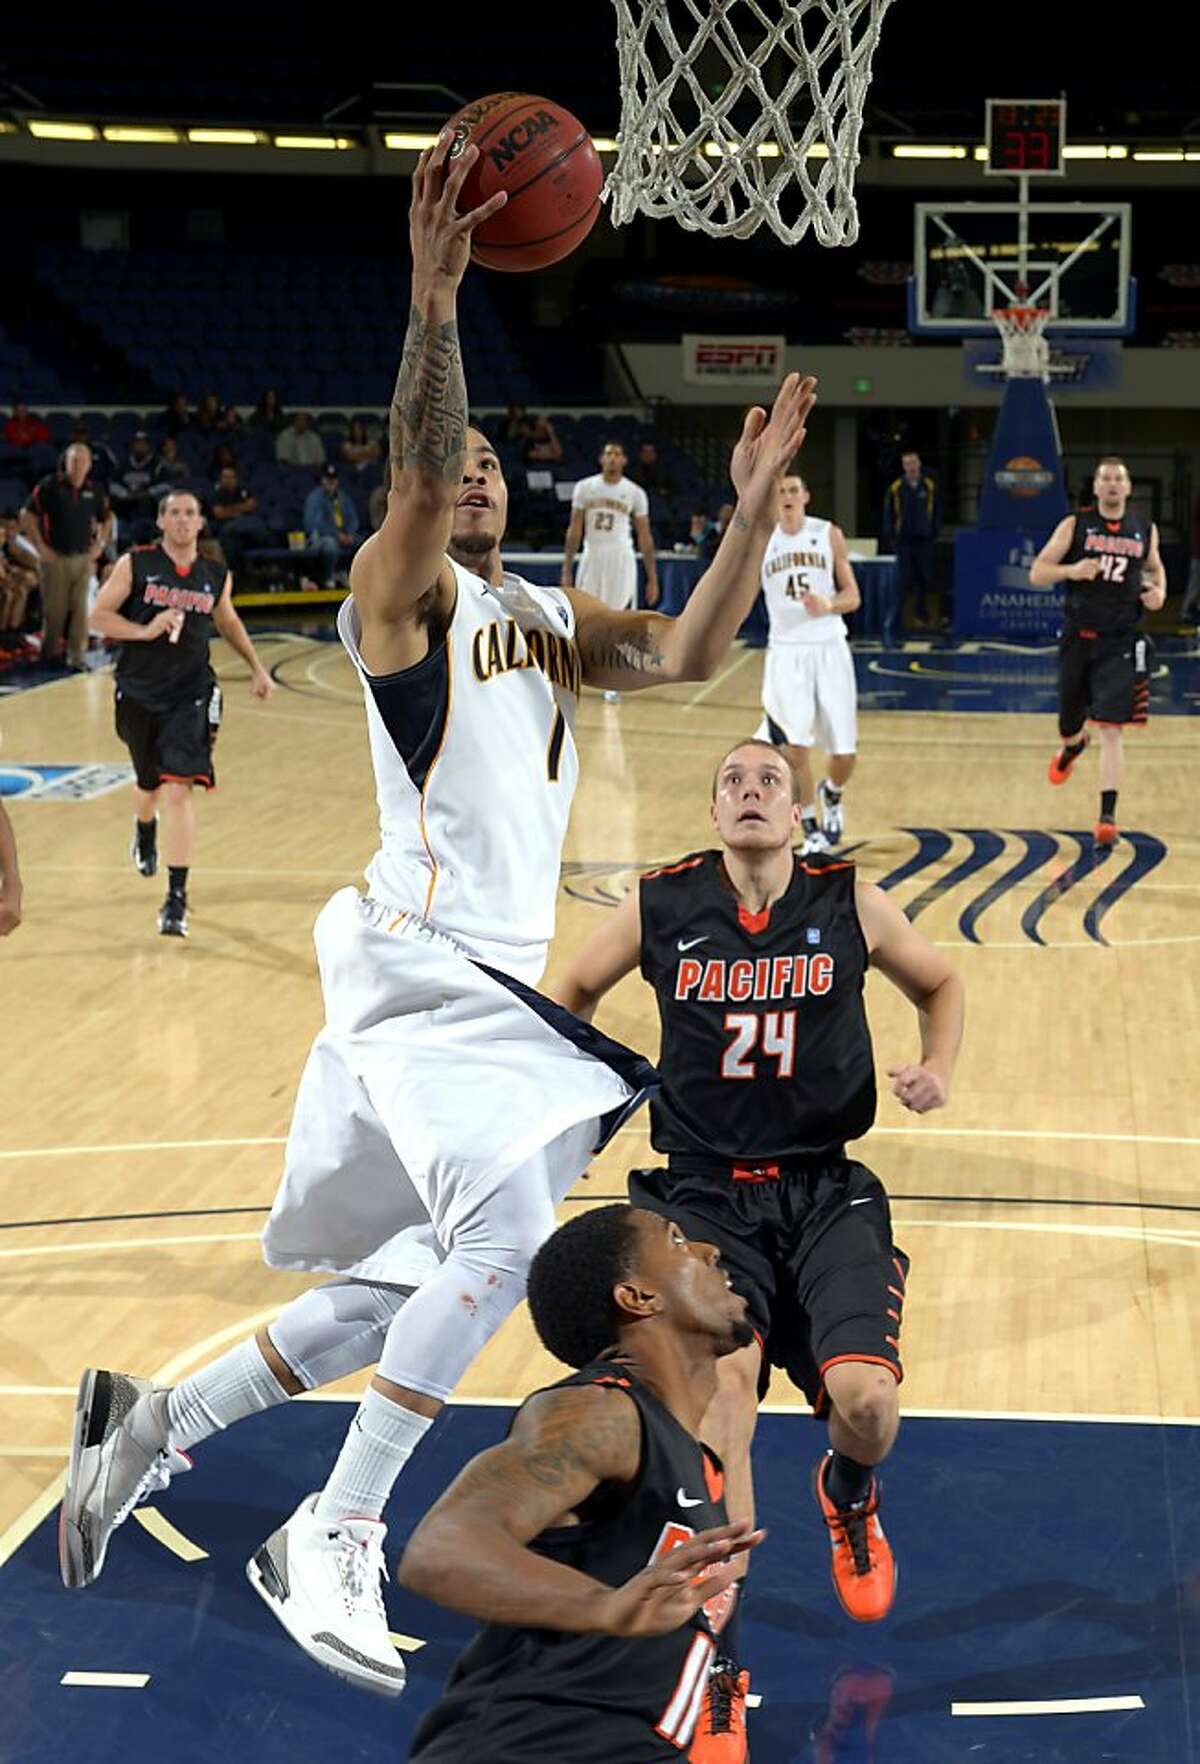 California's Justin Cobbs, left, puts up a shot as Pacific's Lorenzo McCloud, below, and Travis Fulton right look on during the second half of their NCAA college basketball game at the DirecTV Classic final, Sunday, Nov. 25, 2012, in Anaheim, Calif. California won 78-58. (AP Photo/Mark J. Terrill)